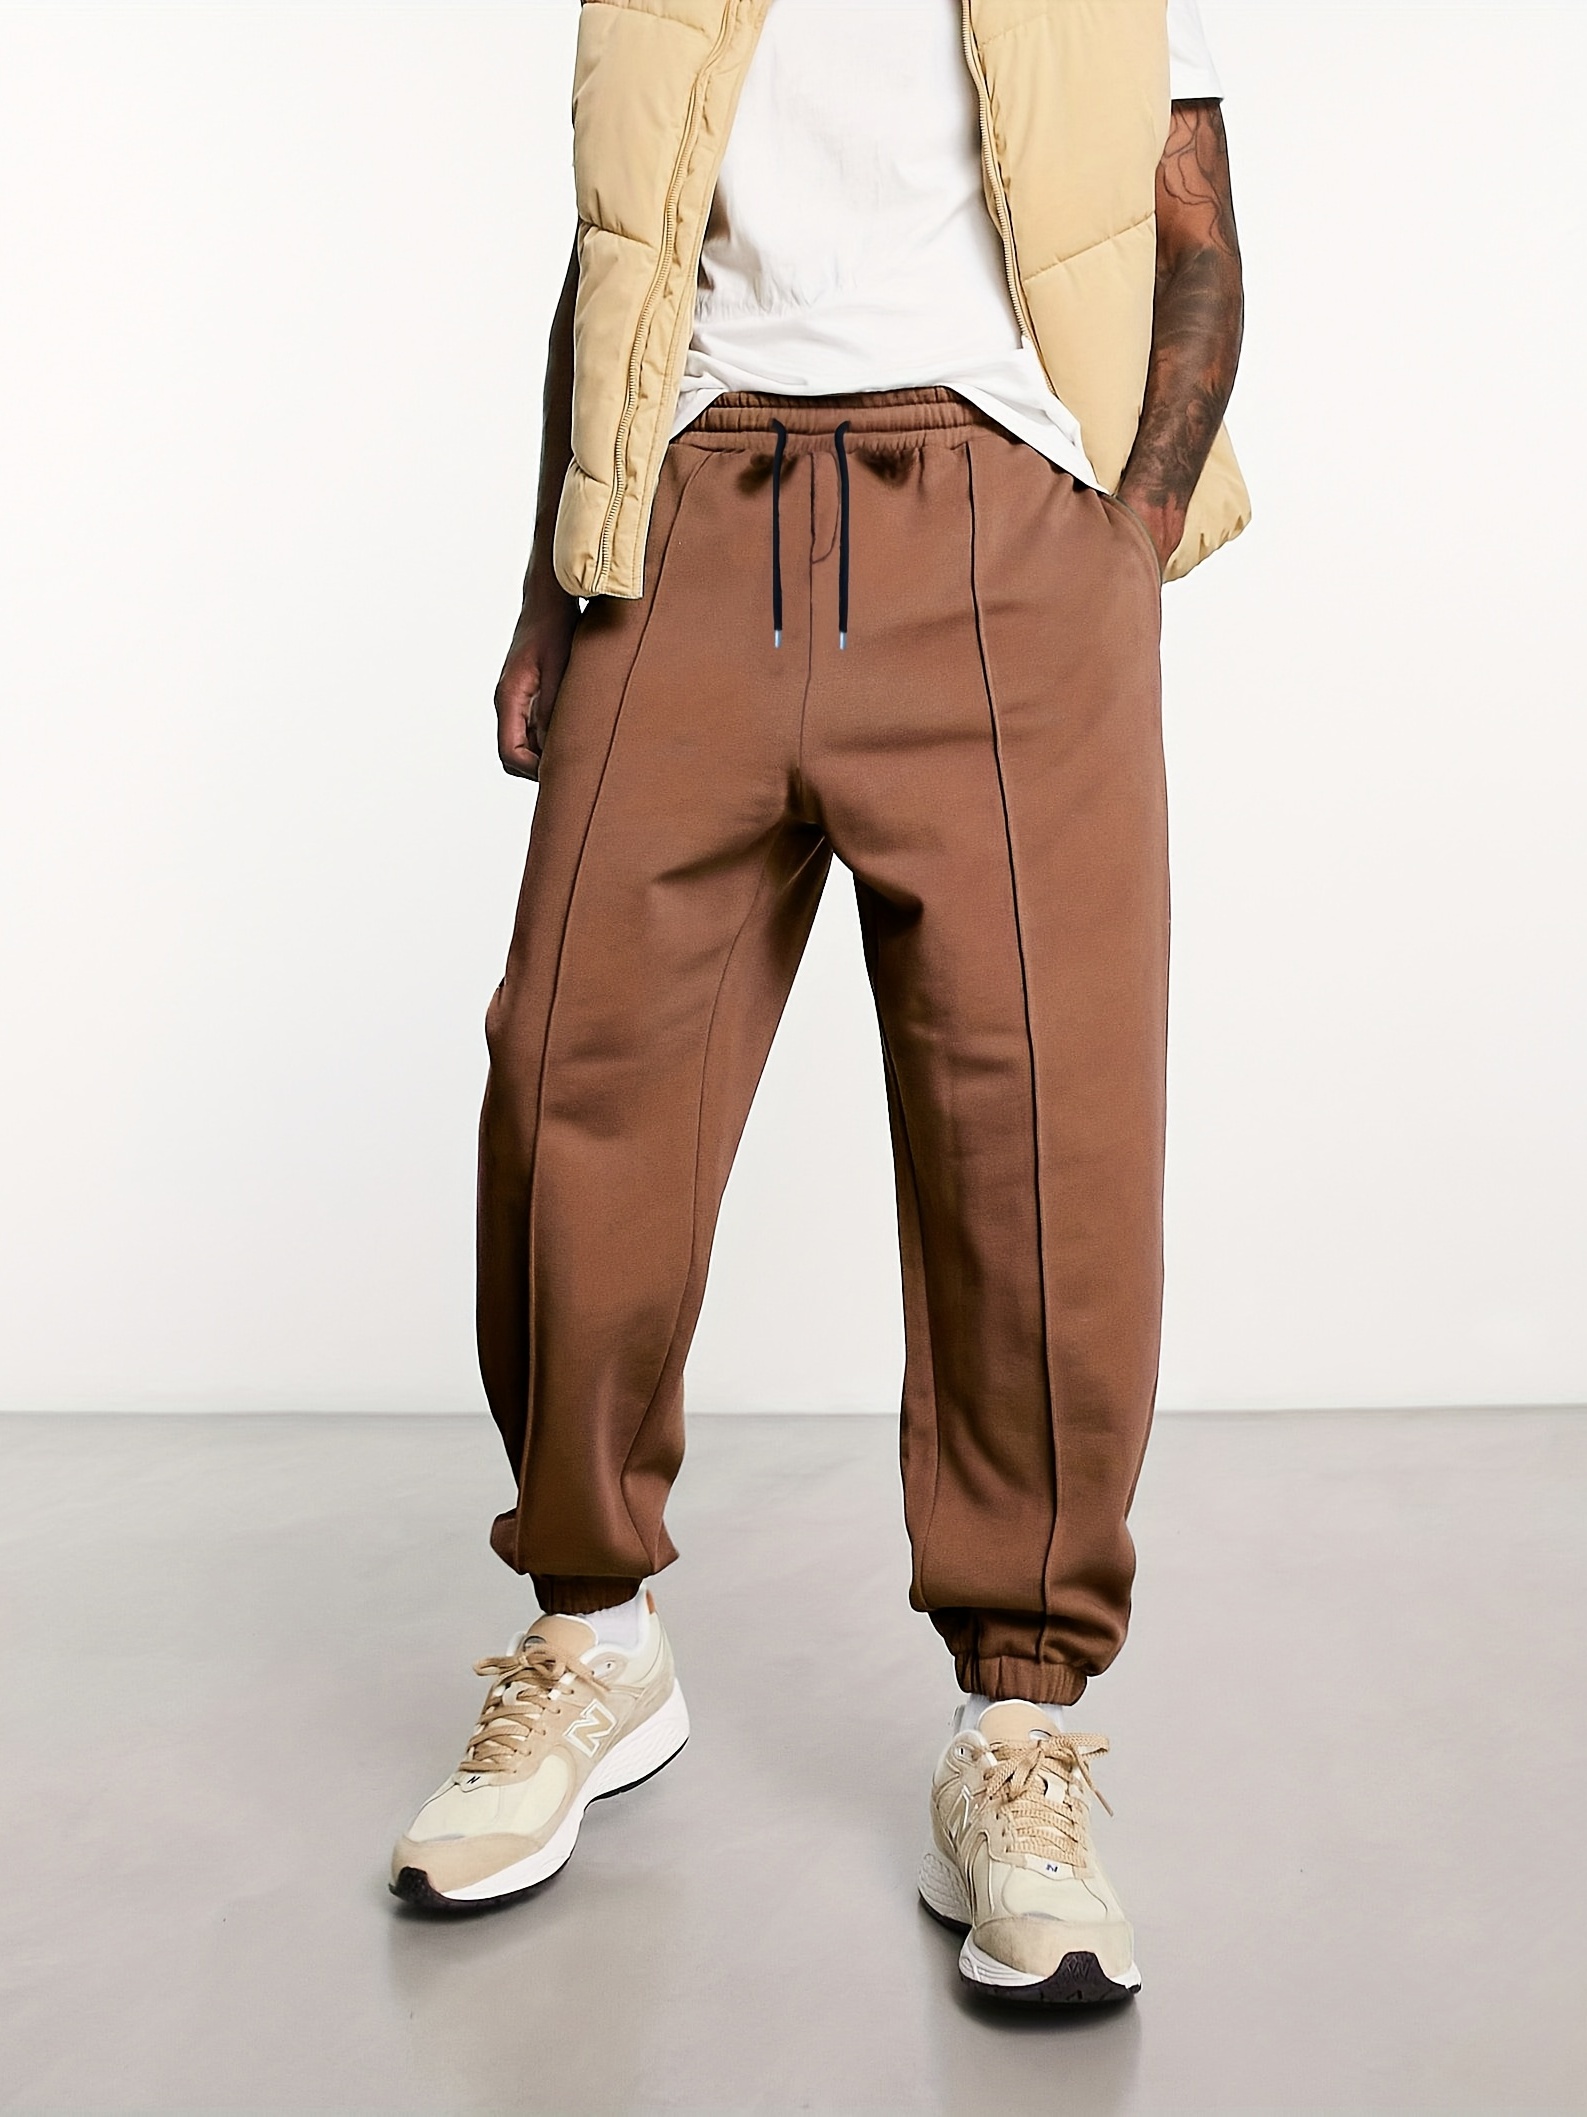 Classic Design Joggers, Men's Casual Waist Drawstring Tapered Thin